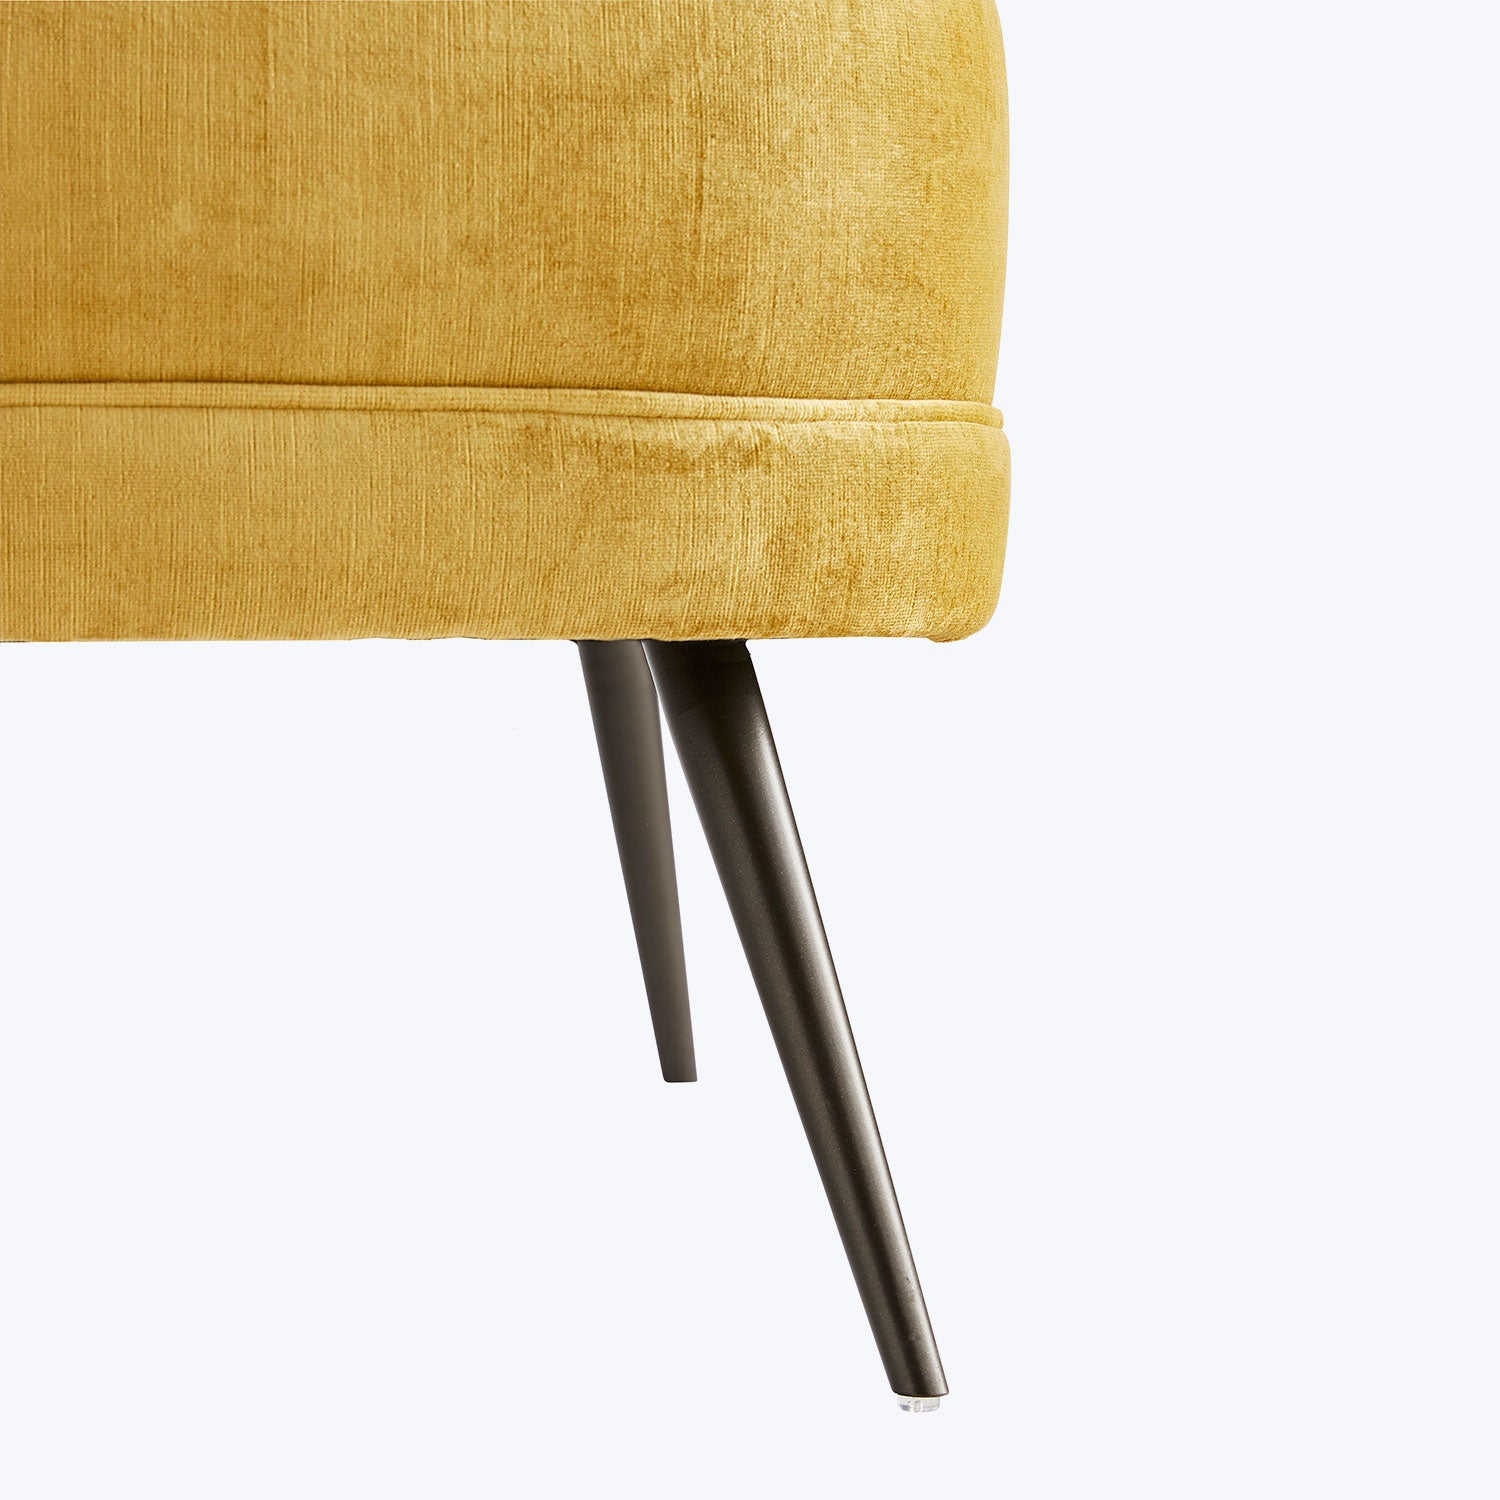 Close-up of modern mustard yellow chair with sleek angled legs.